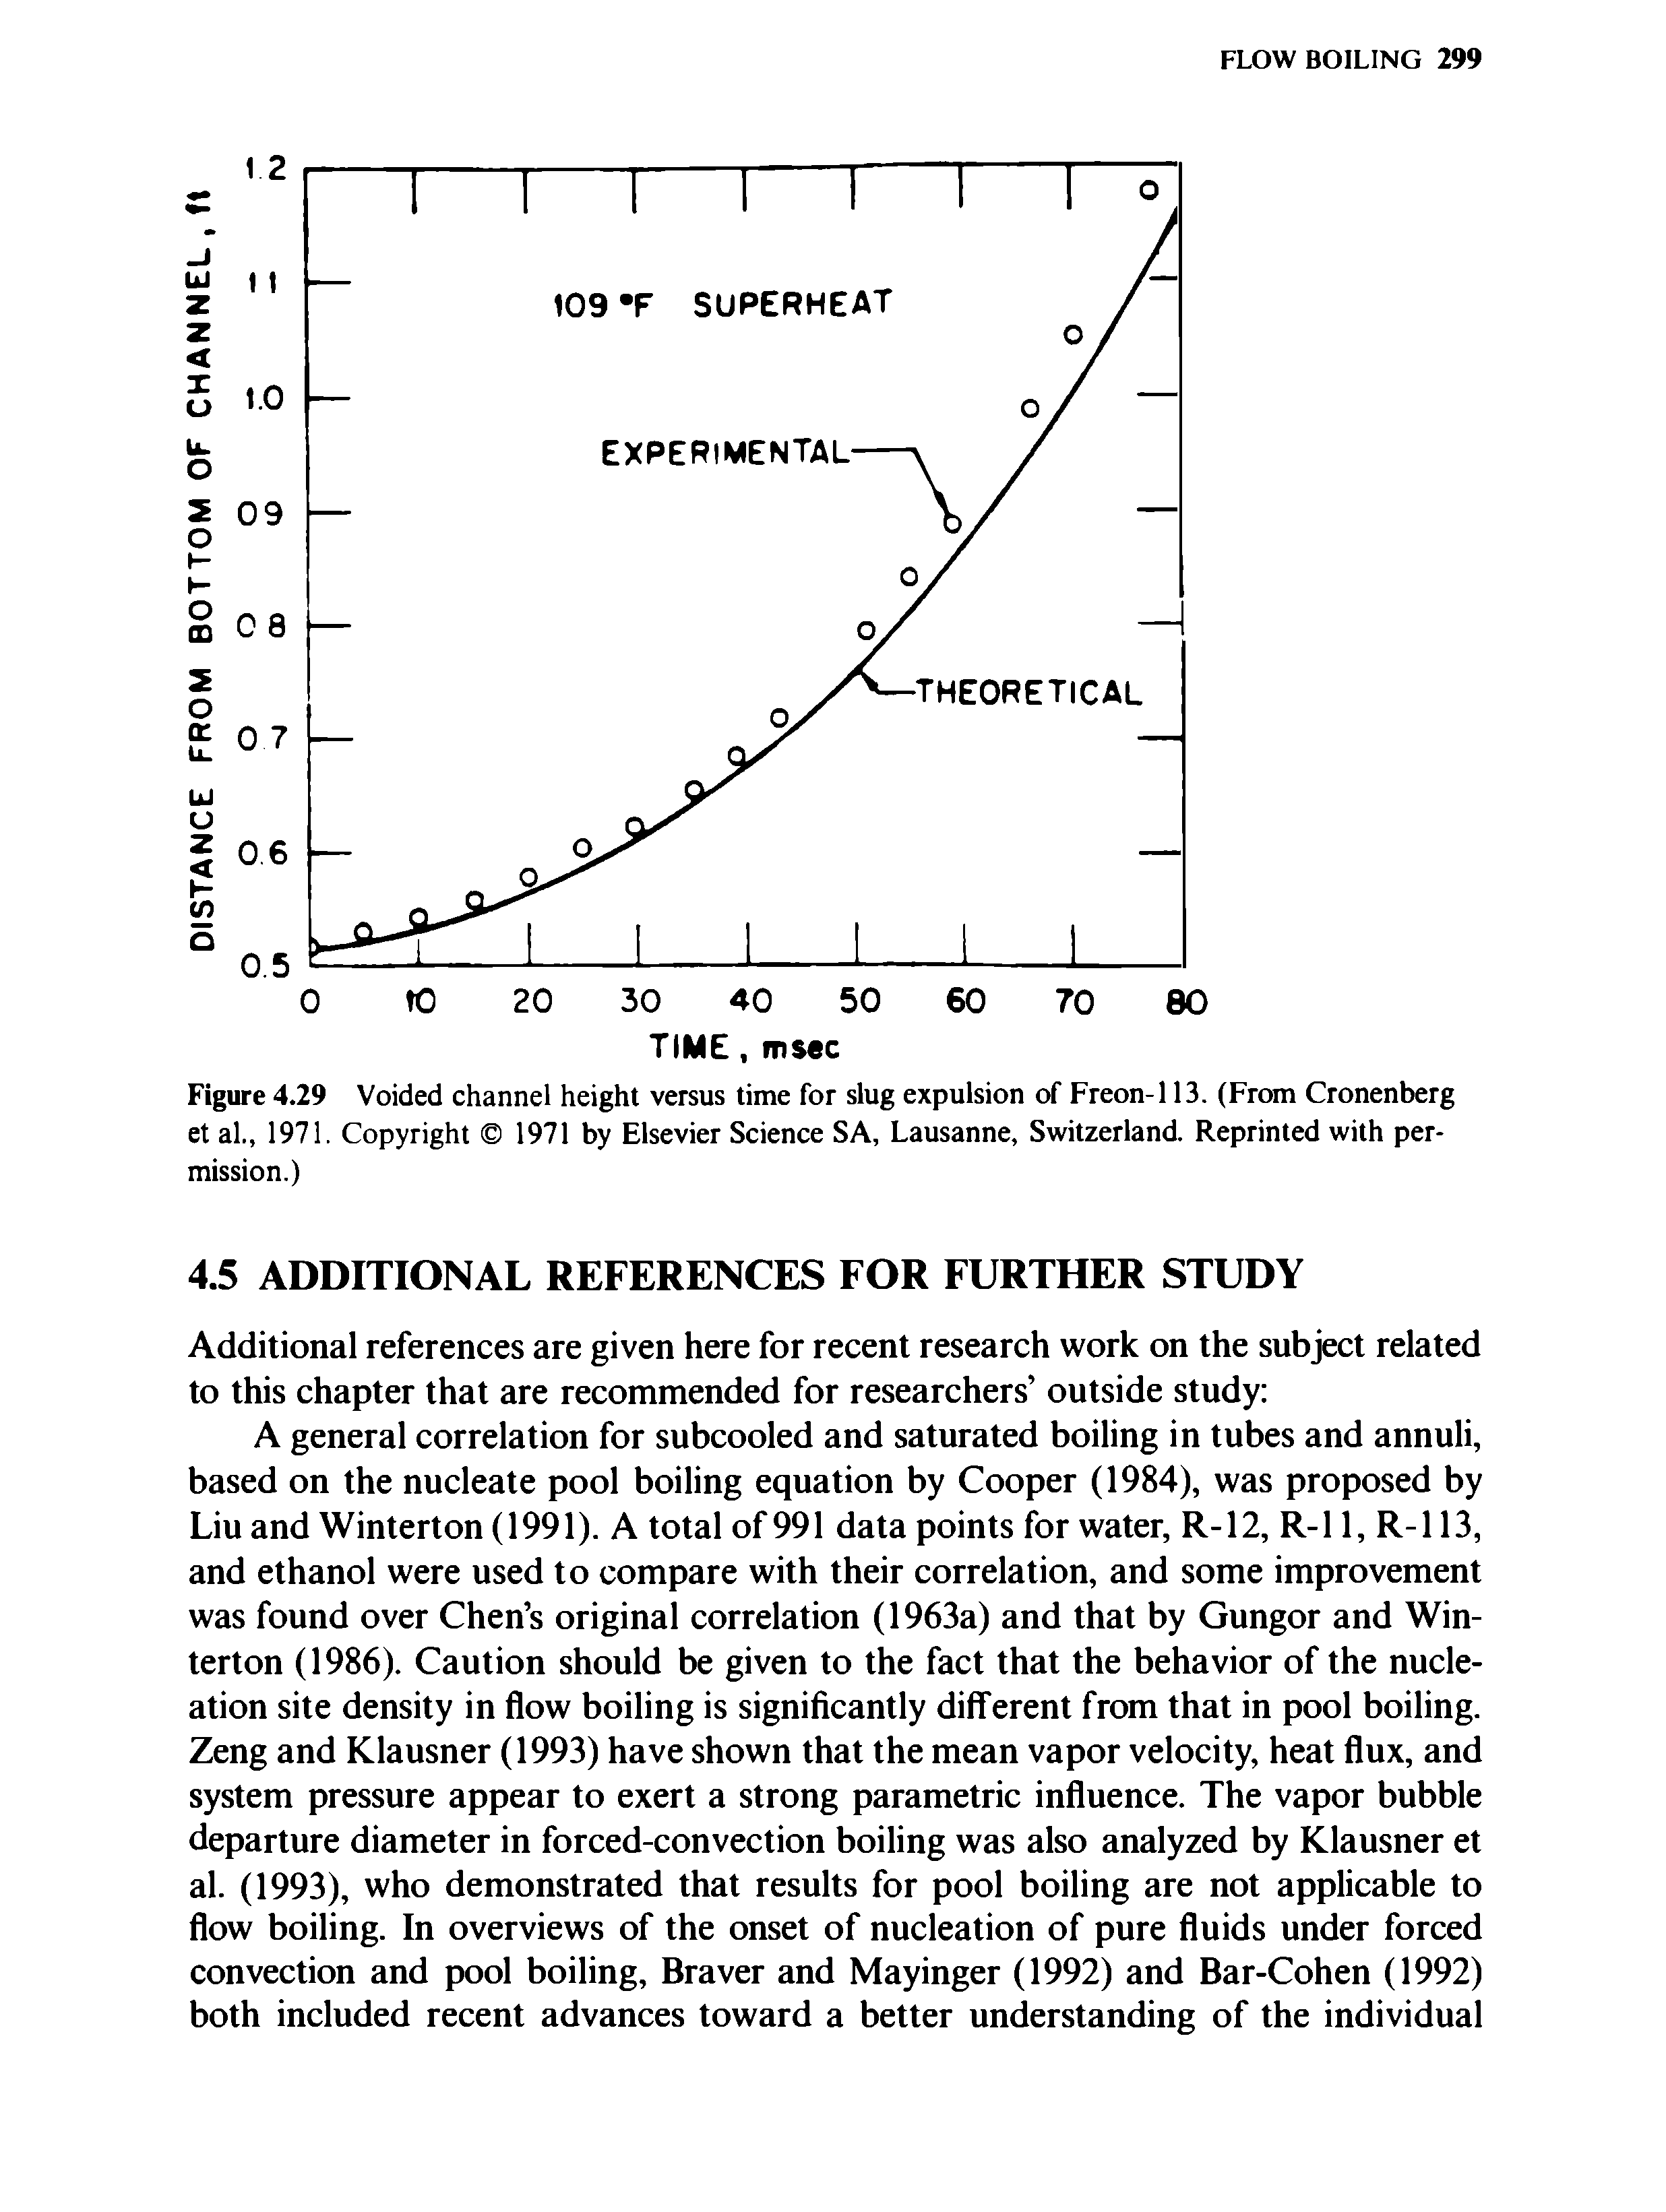 Figure 4.29 Voided channel height versus time for slug expulsion of Freon-113. (From Cronenberg et al., 1971. Copyright 1971 by Elsevier Science SA, Lausanne, Switzerland. Reprinted with permission.)...